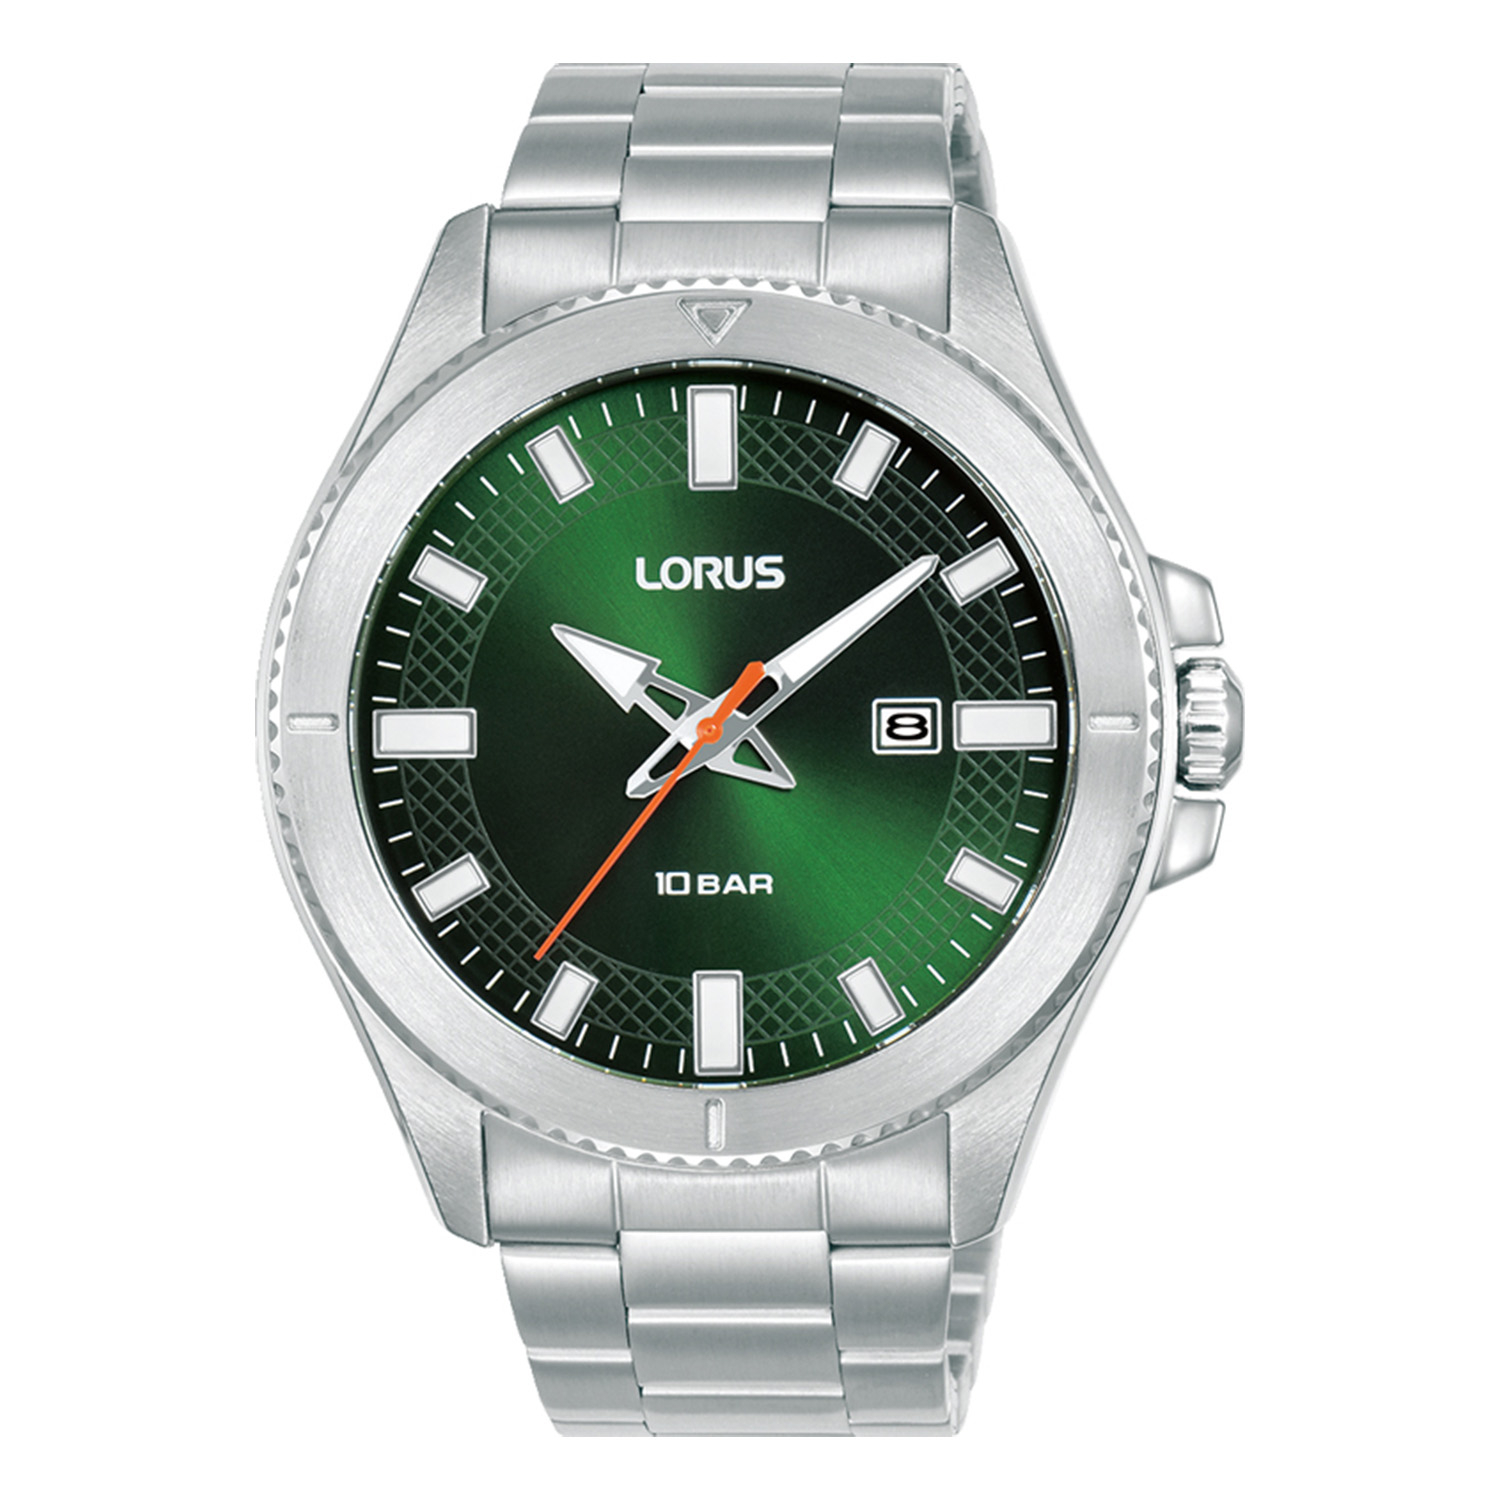 Mens LORUS stainless steel watch with green dial and silver bracelet.